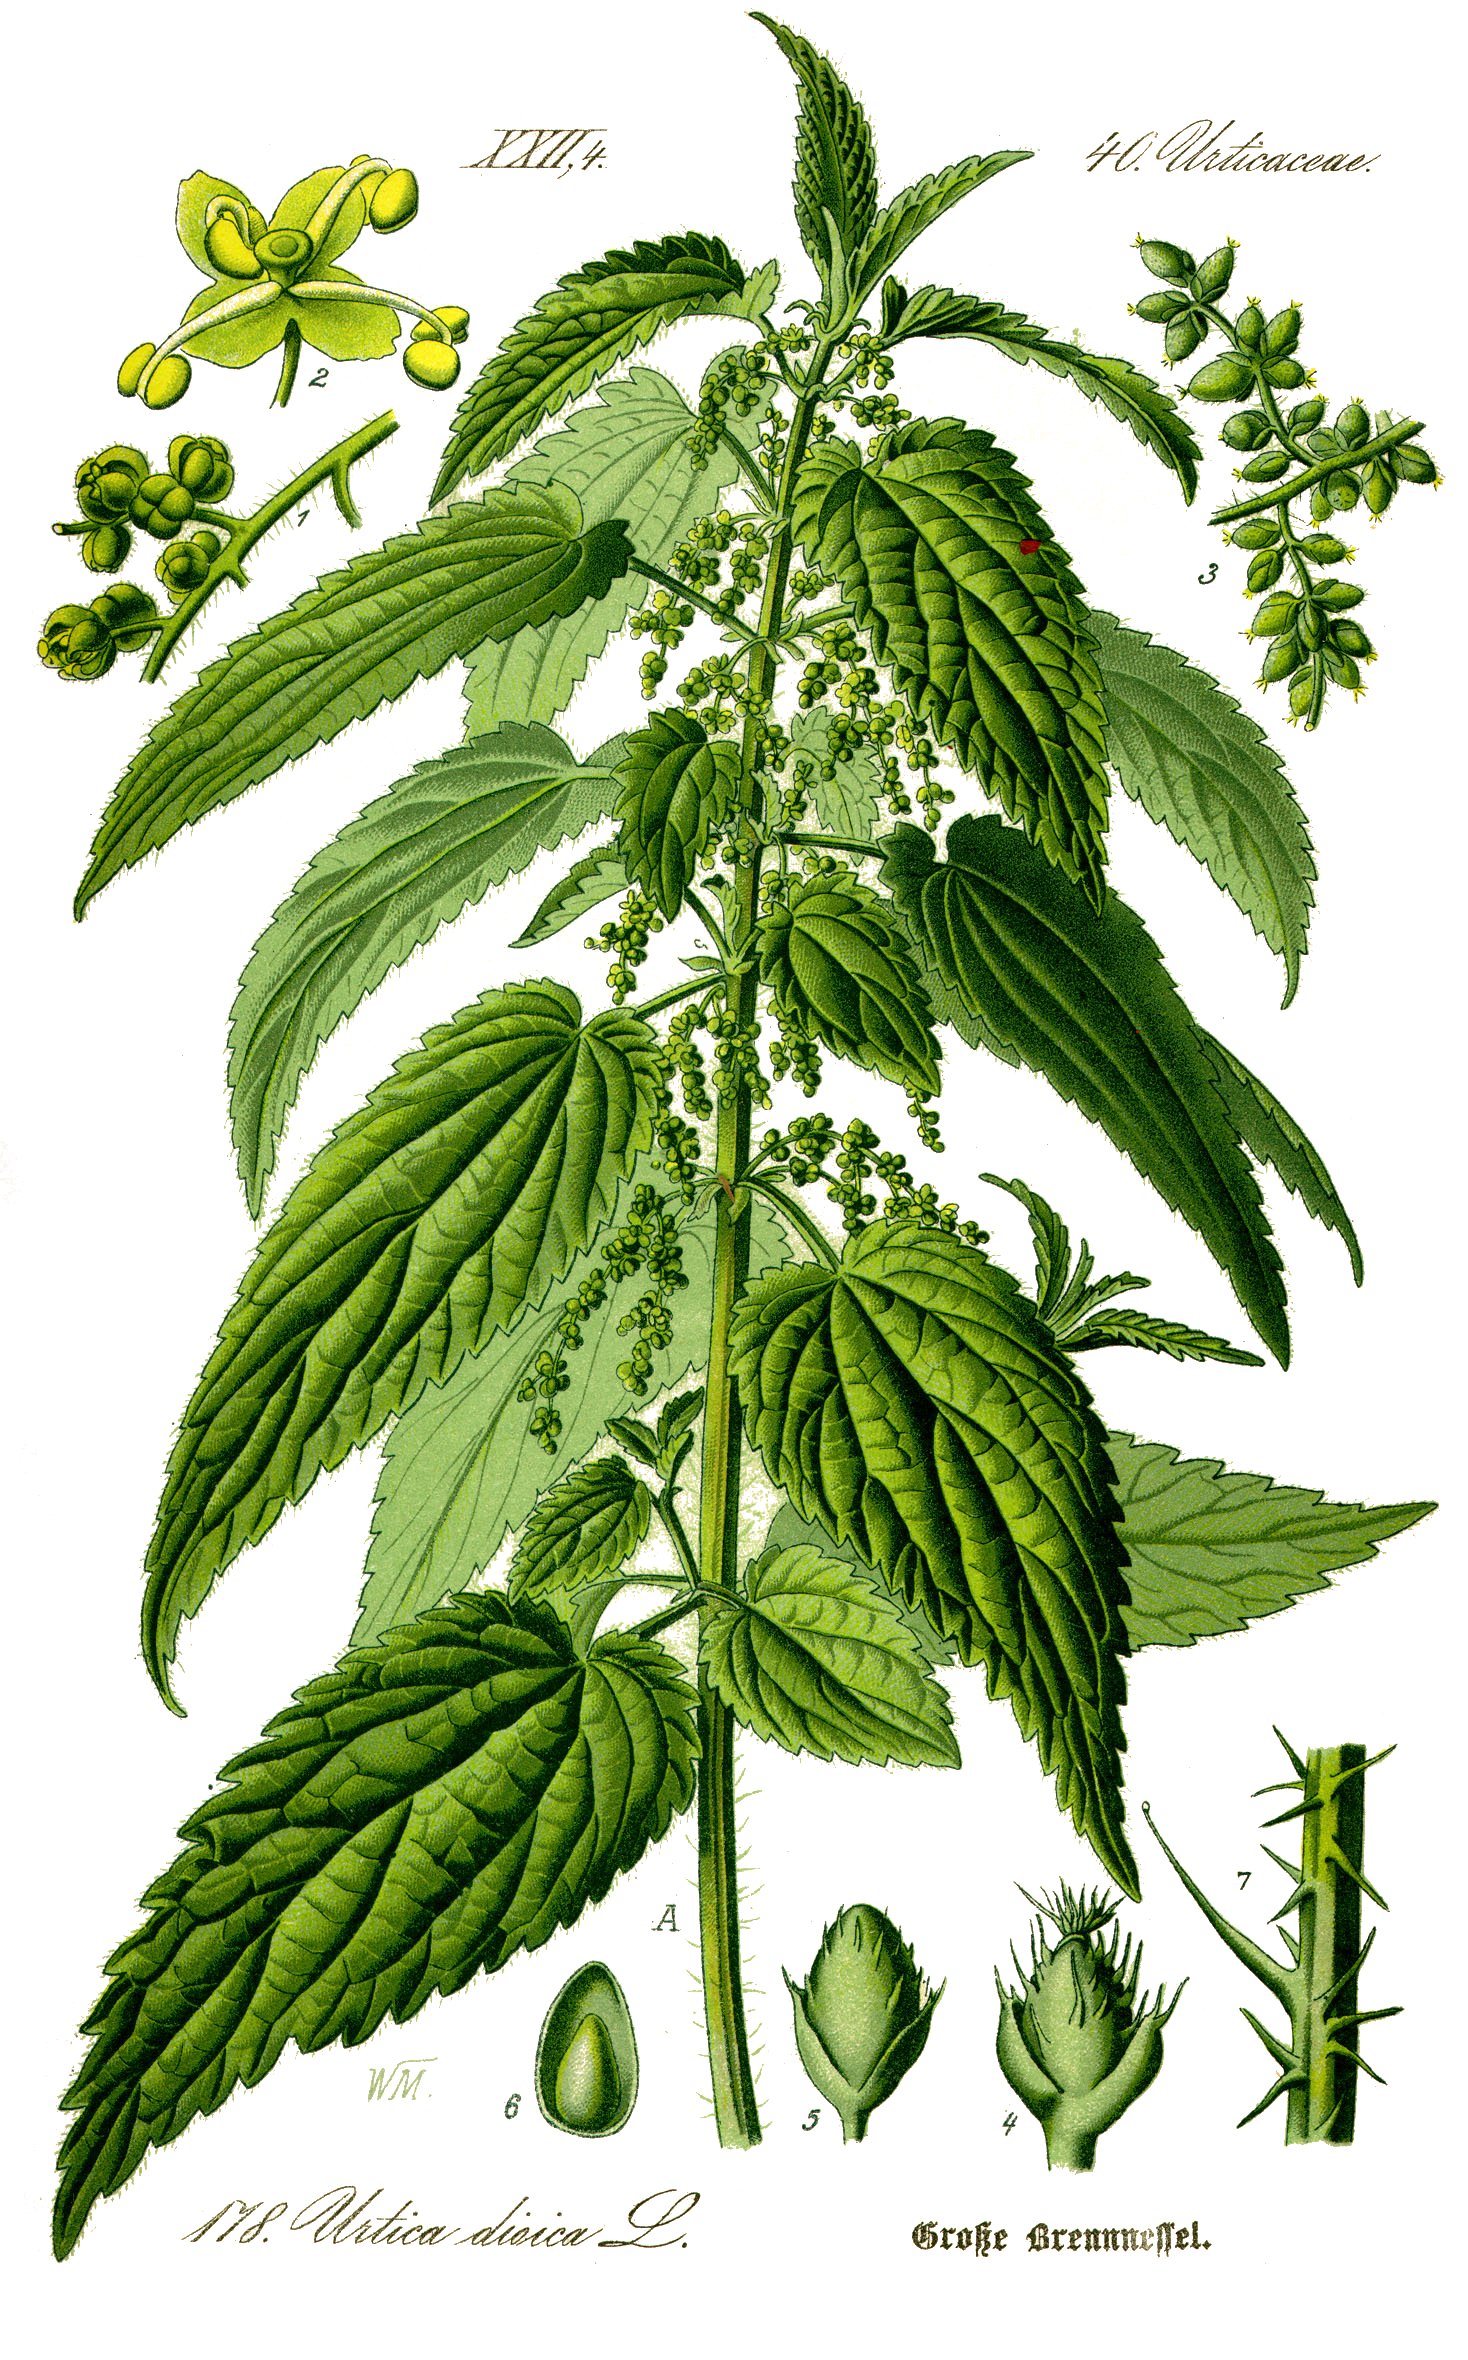 Stinging nettle color plate from a book published in Germany in 1885. Shows the plant and details of leaves, stem, seeds and stinging hairs. Upcoming post: a critter that eats this stuff.